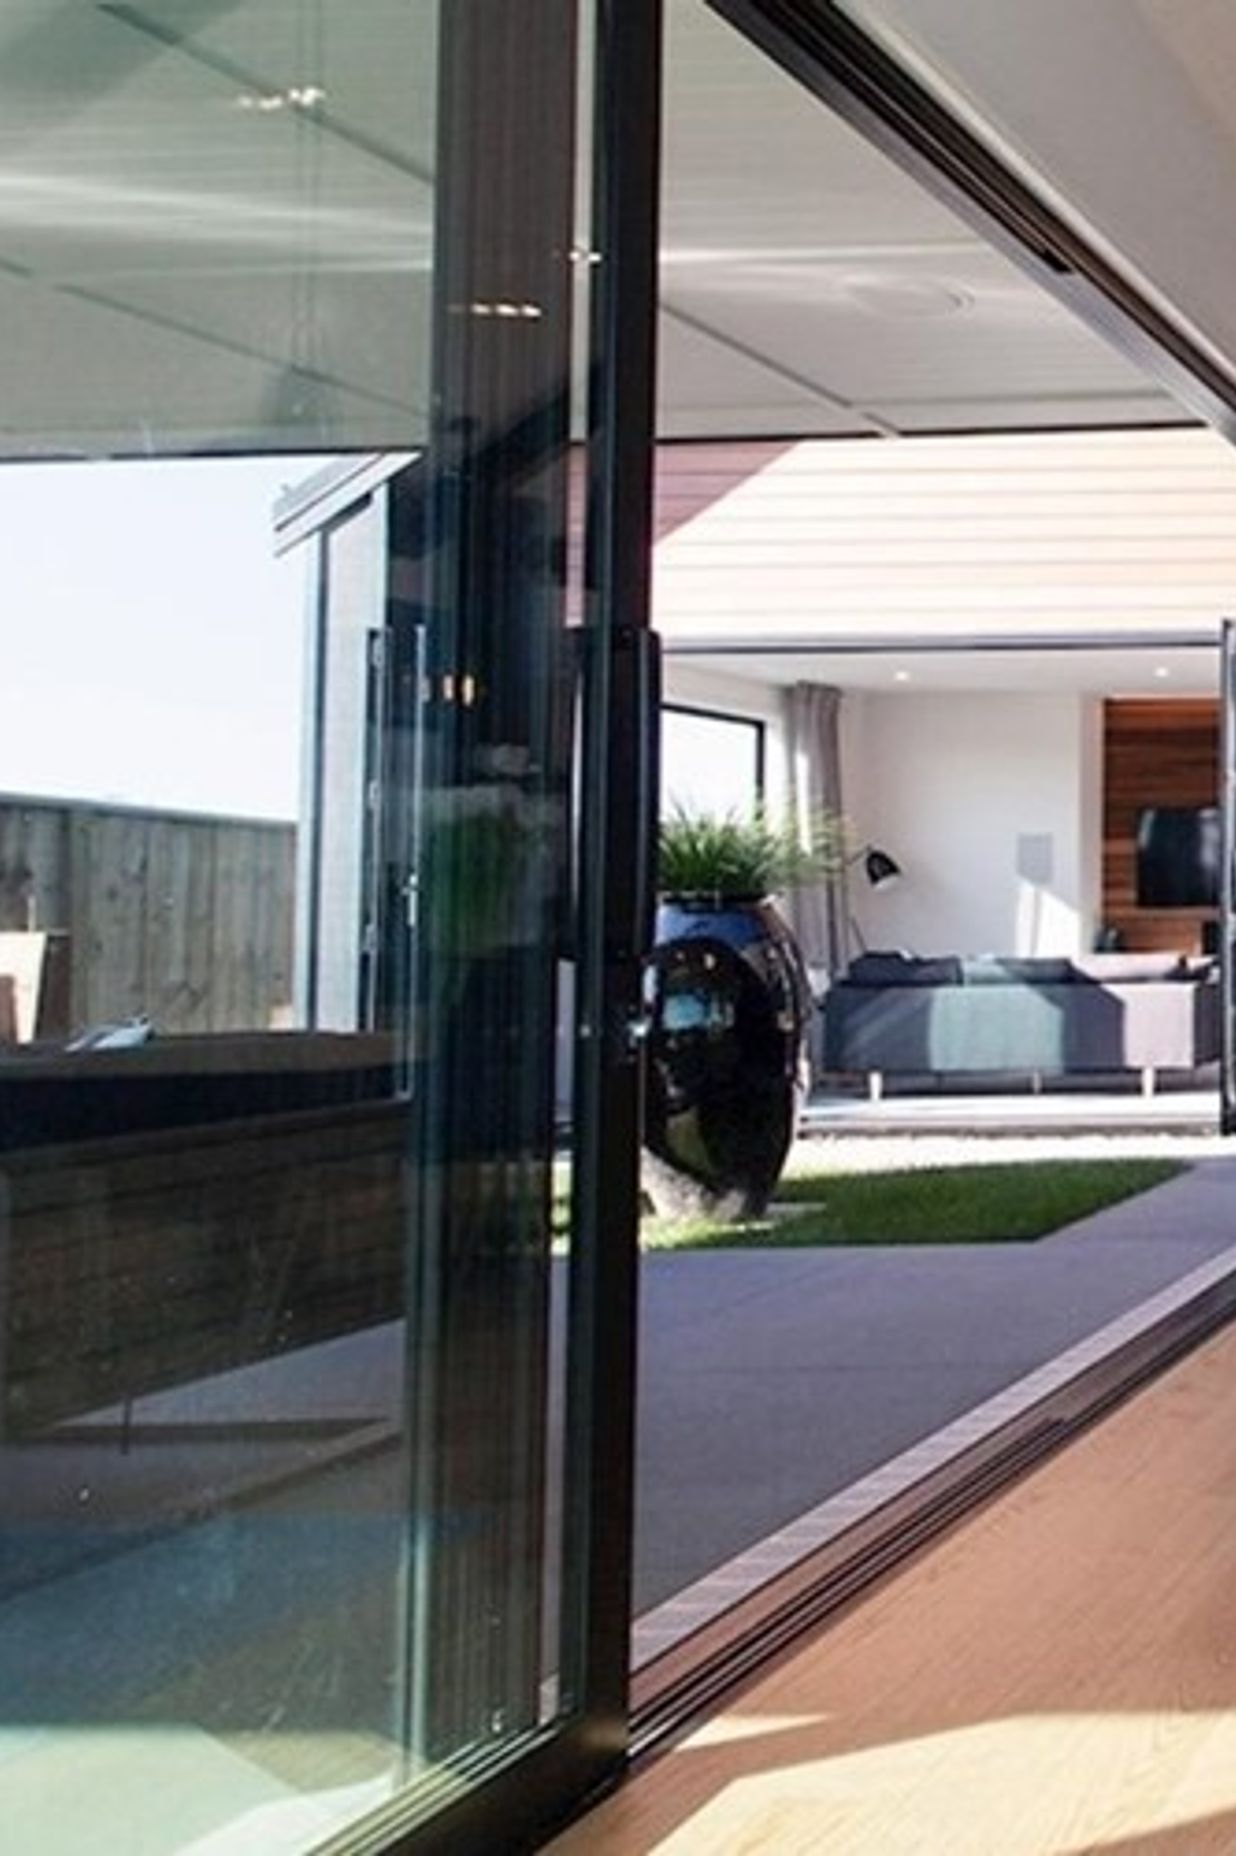 What is LevelStep® and how can it improve sliding doors?